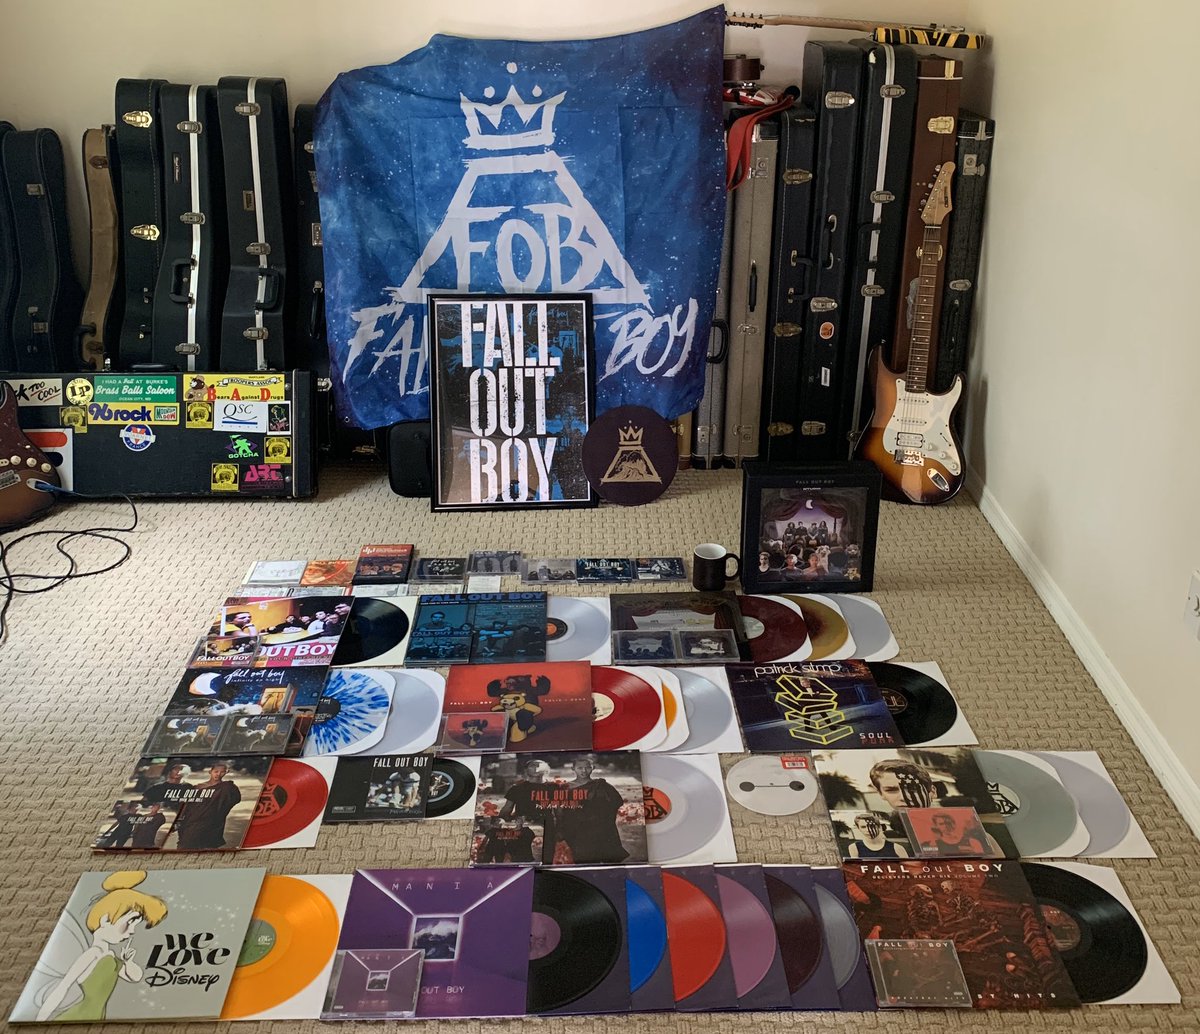 Thread: My Fall Out Boy Collection!1. The Whole Thing: Everything in 1 picture (plus Eddie’s guitars)2. All the Vinyl3. All the CDs4. All the tickets